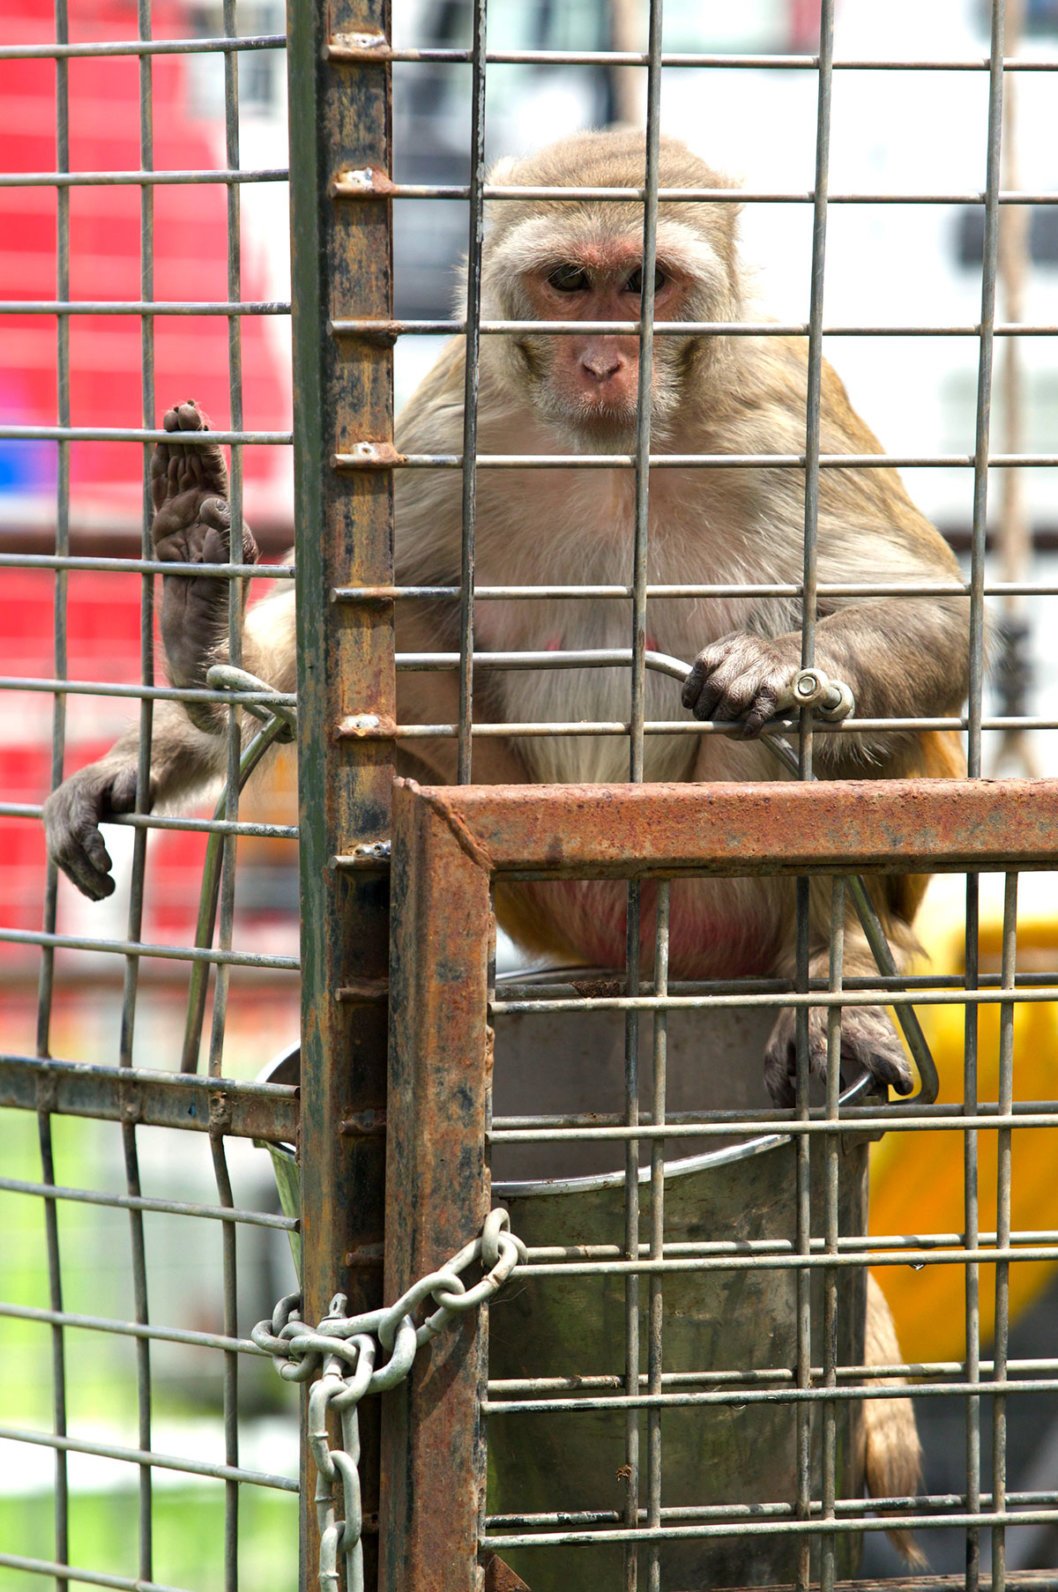 A macaque monkey in a cage at the circus